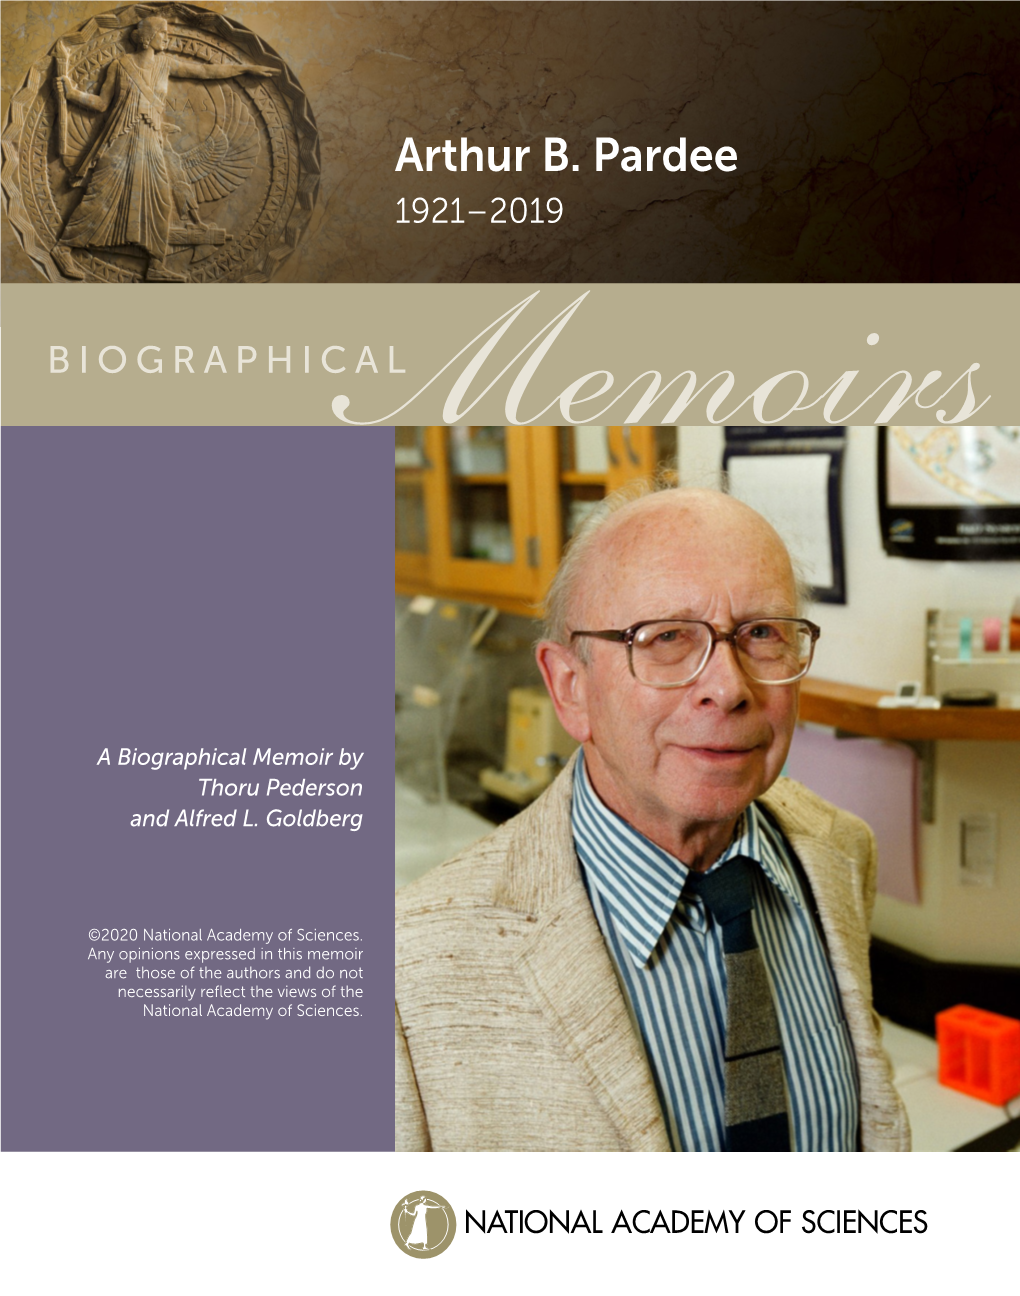 Arthur Pardee Was a Seminal Figure in the Modern Era of Biochemistry Whose Discoveries Played a Critical Role in the Development of Molecular Biology